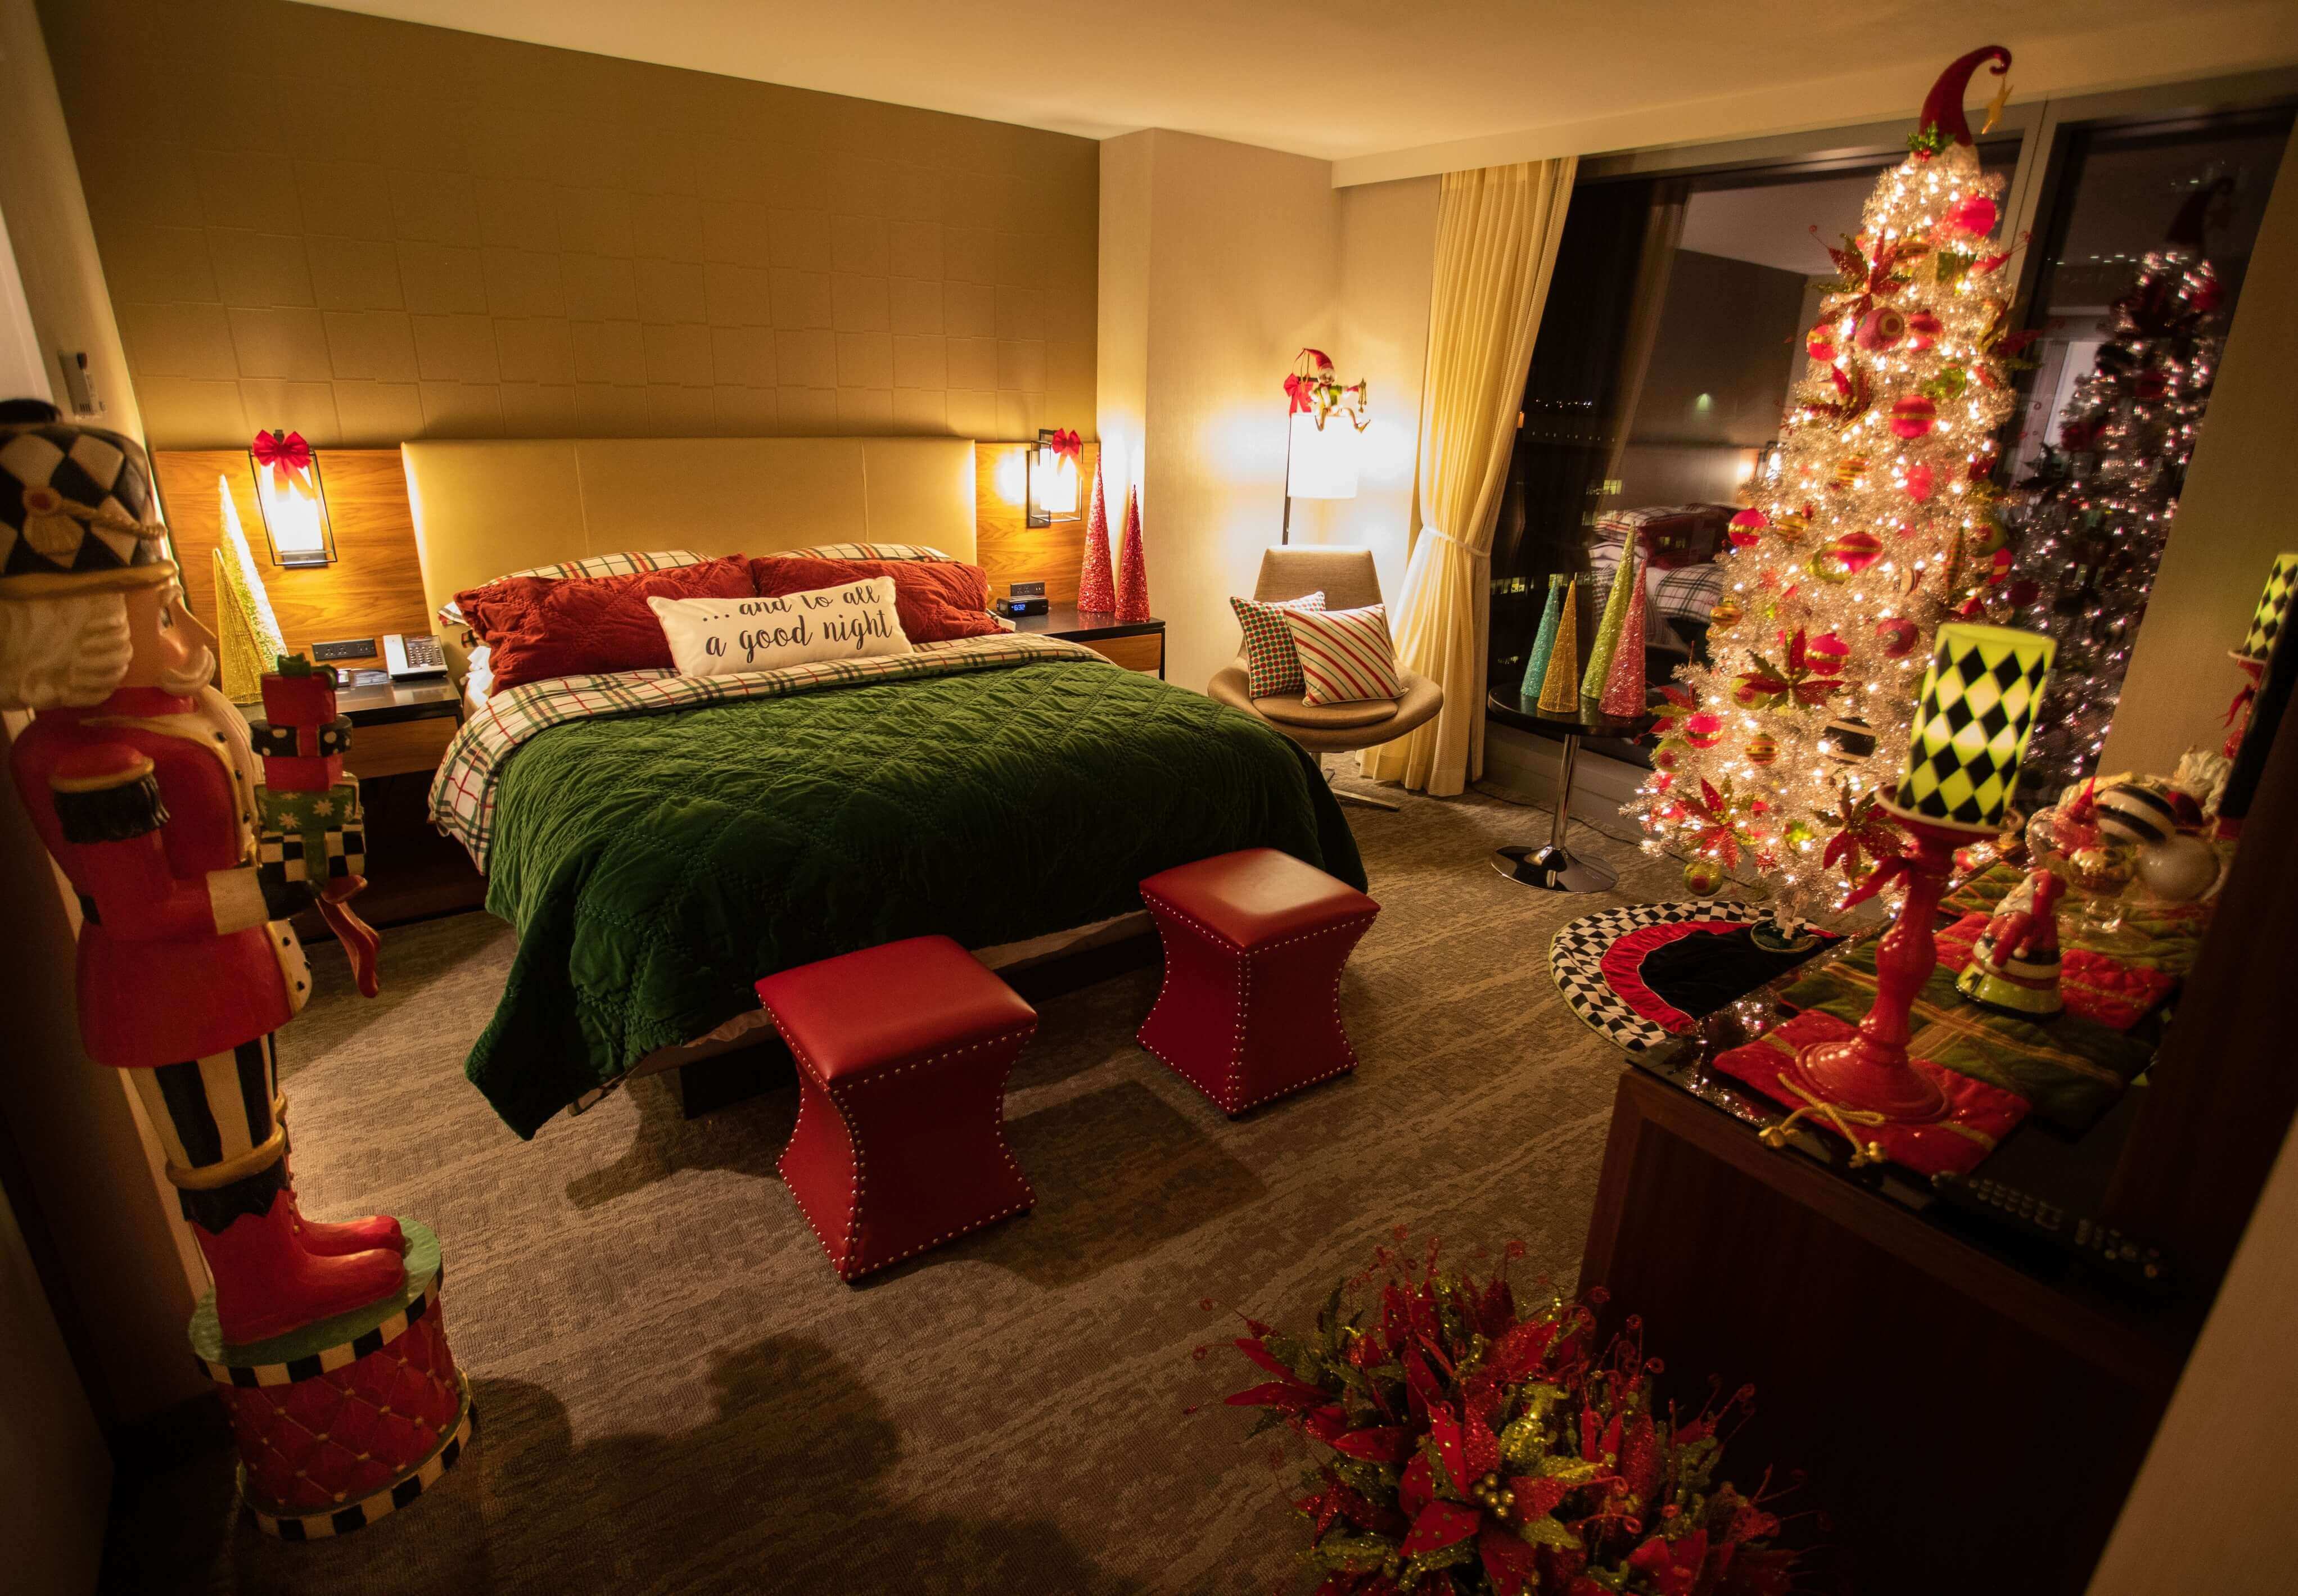 Enjoy a festive sleep, when you spend the night in the Mr. Kringle Suite at the Hilton Cleveland Downtown.